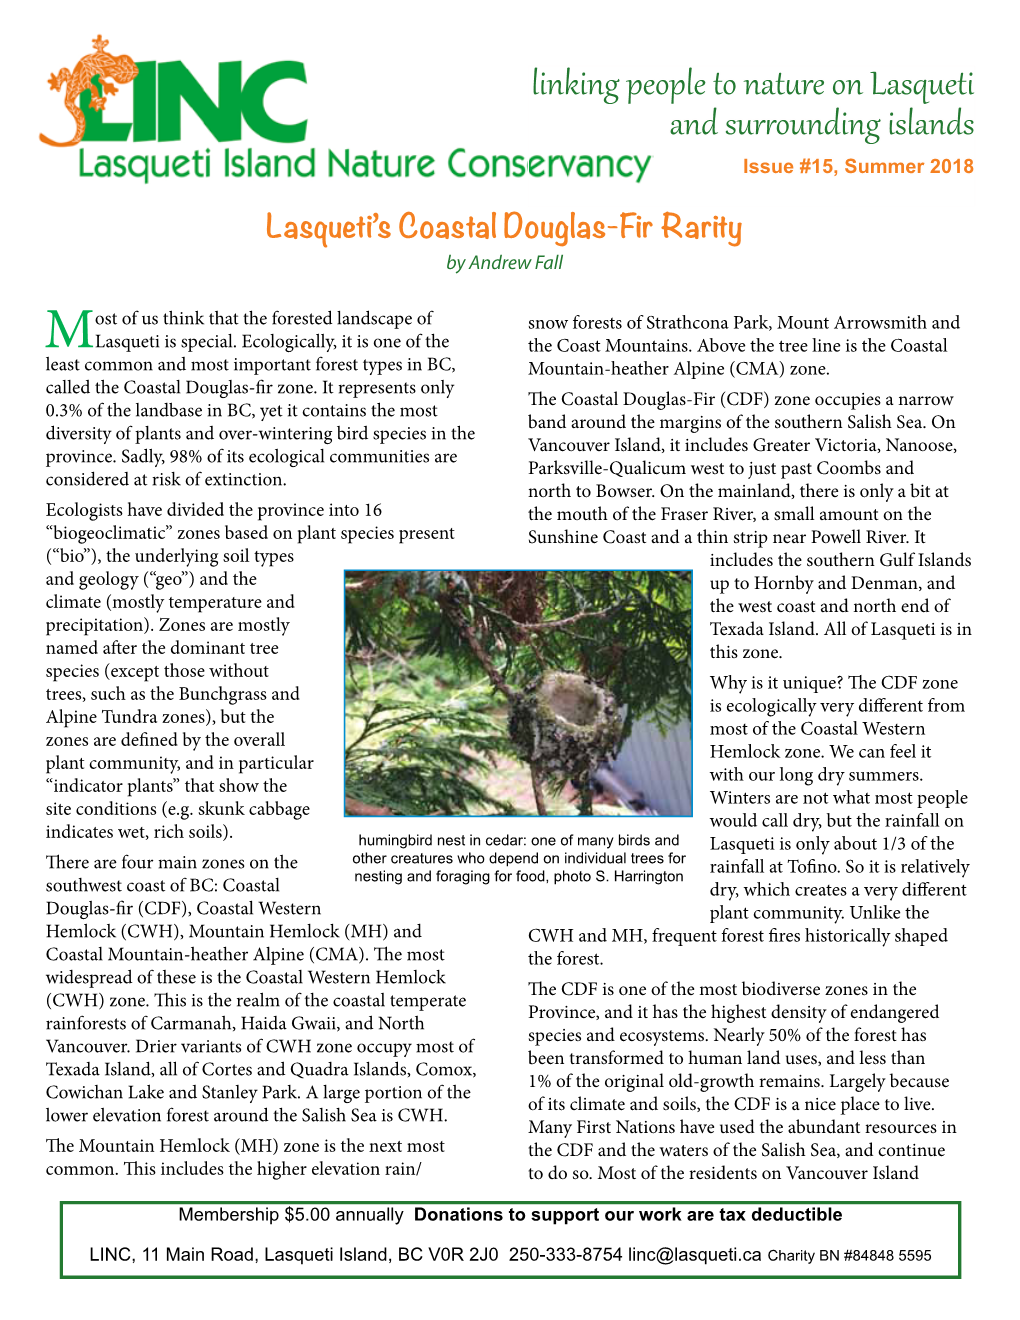 Linking People to Nature on Lasqueti and Surrounding Islands Issue #15, Summer 2018